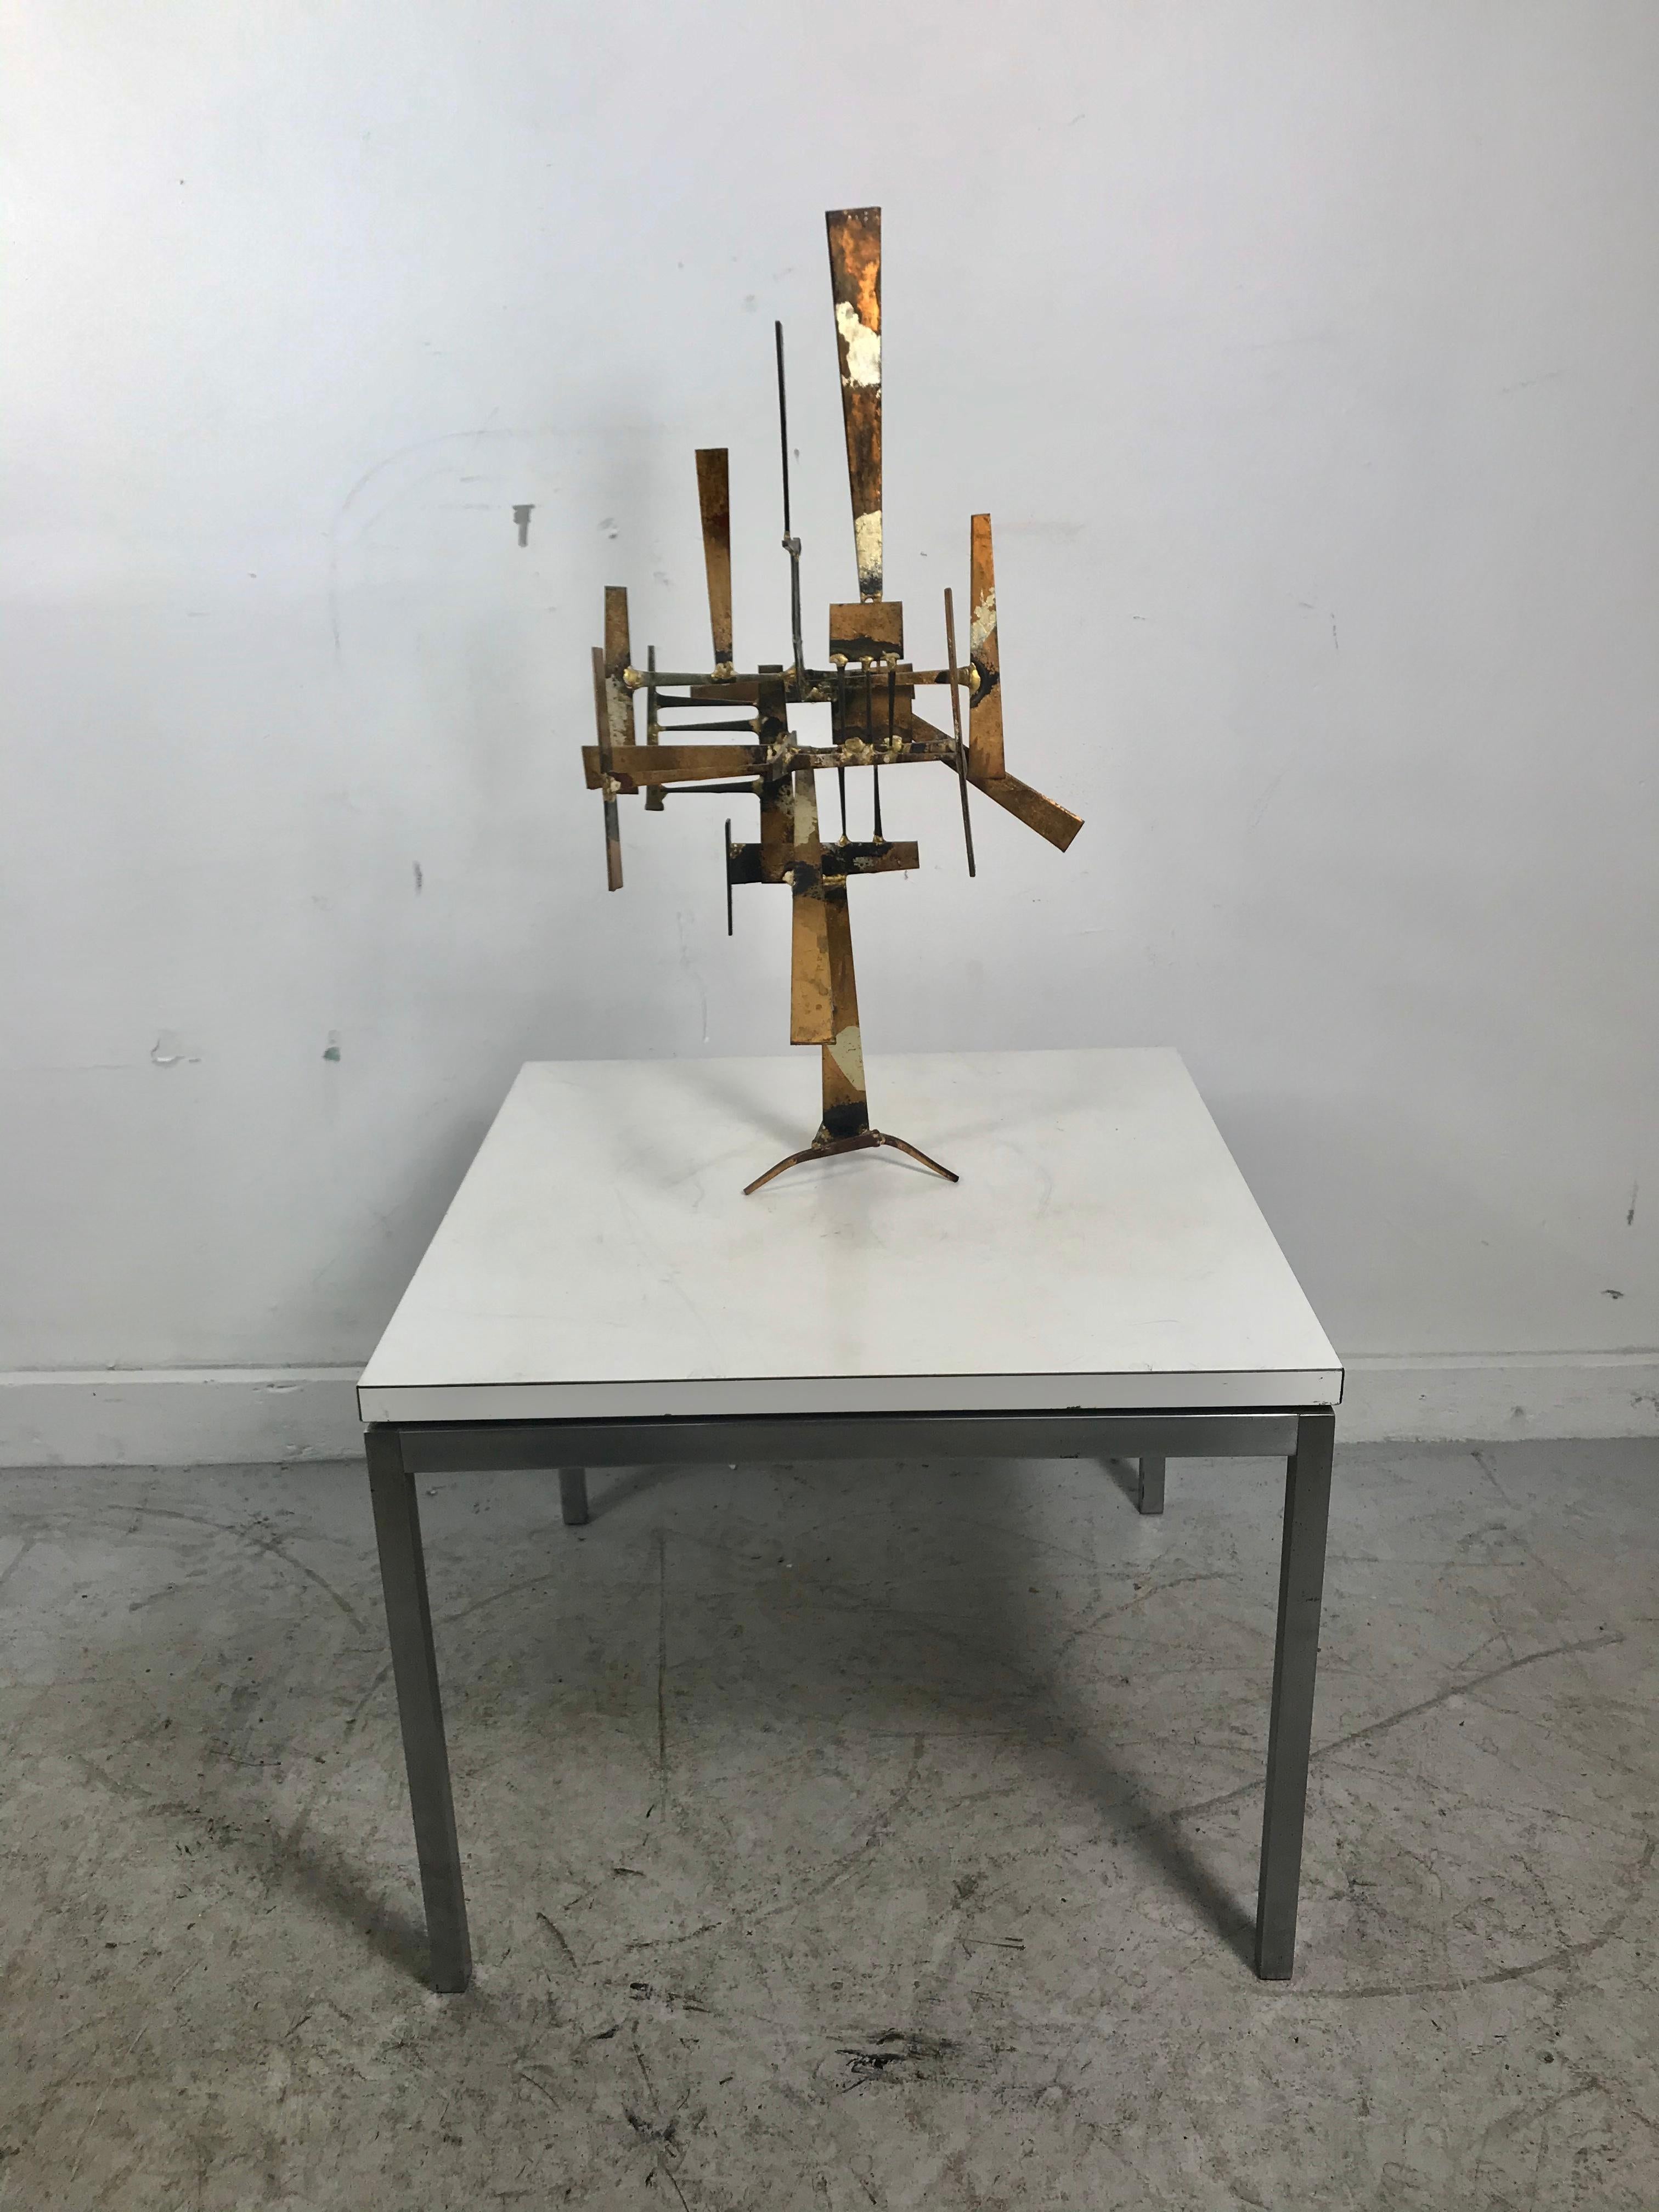 Mid-20th Century Modernist Welded Metal Abstract Brutalist Table Sculpture by William Bowie